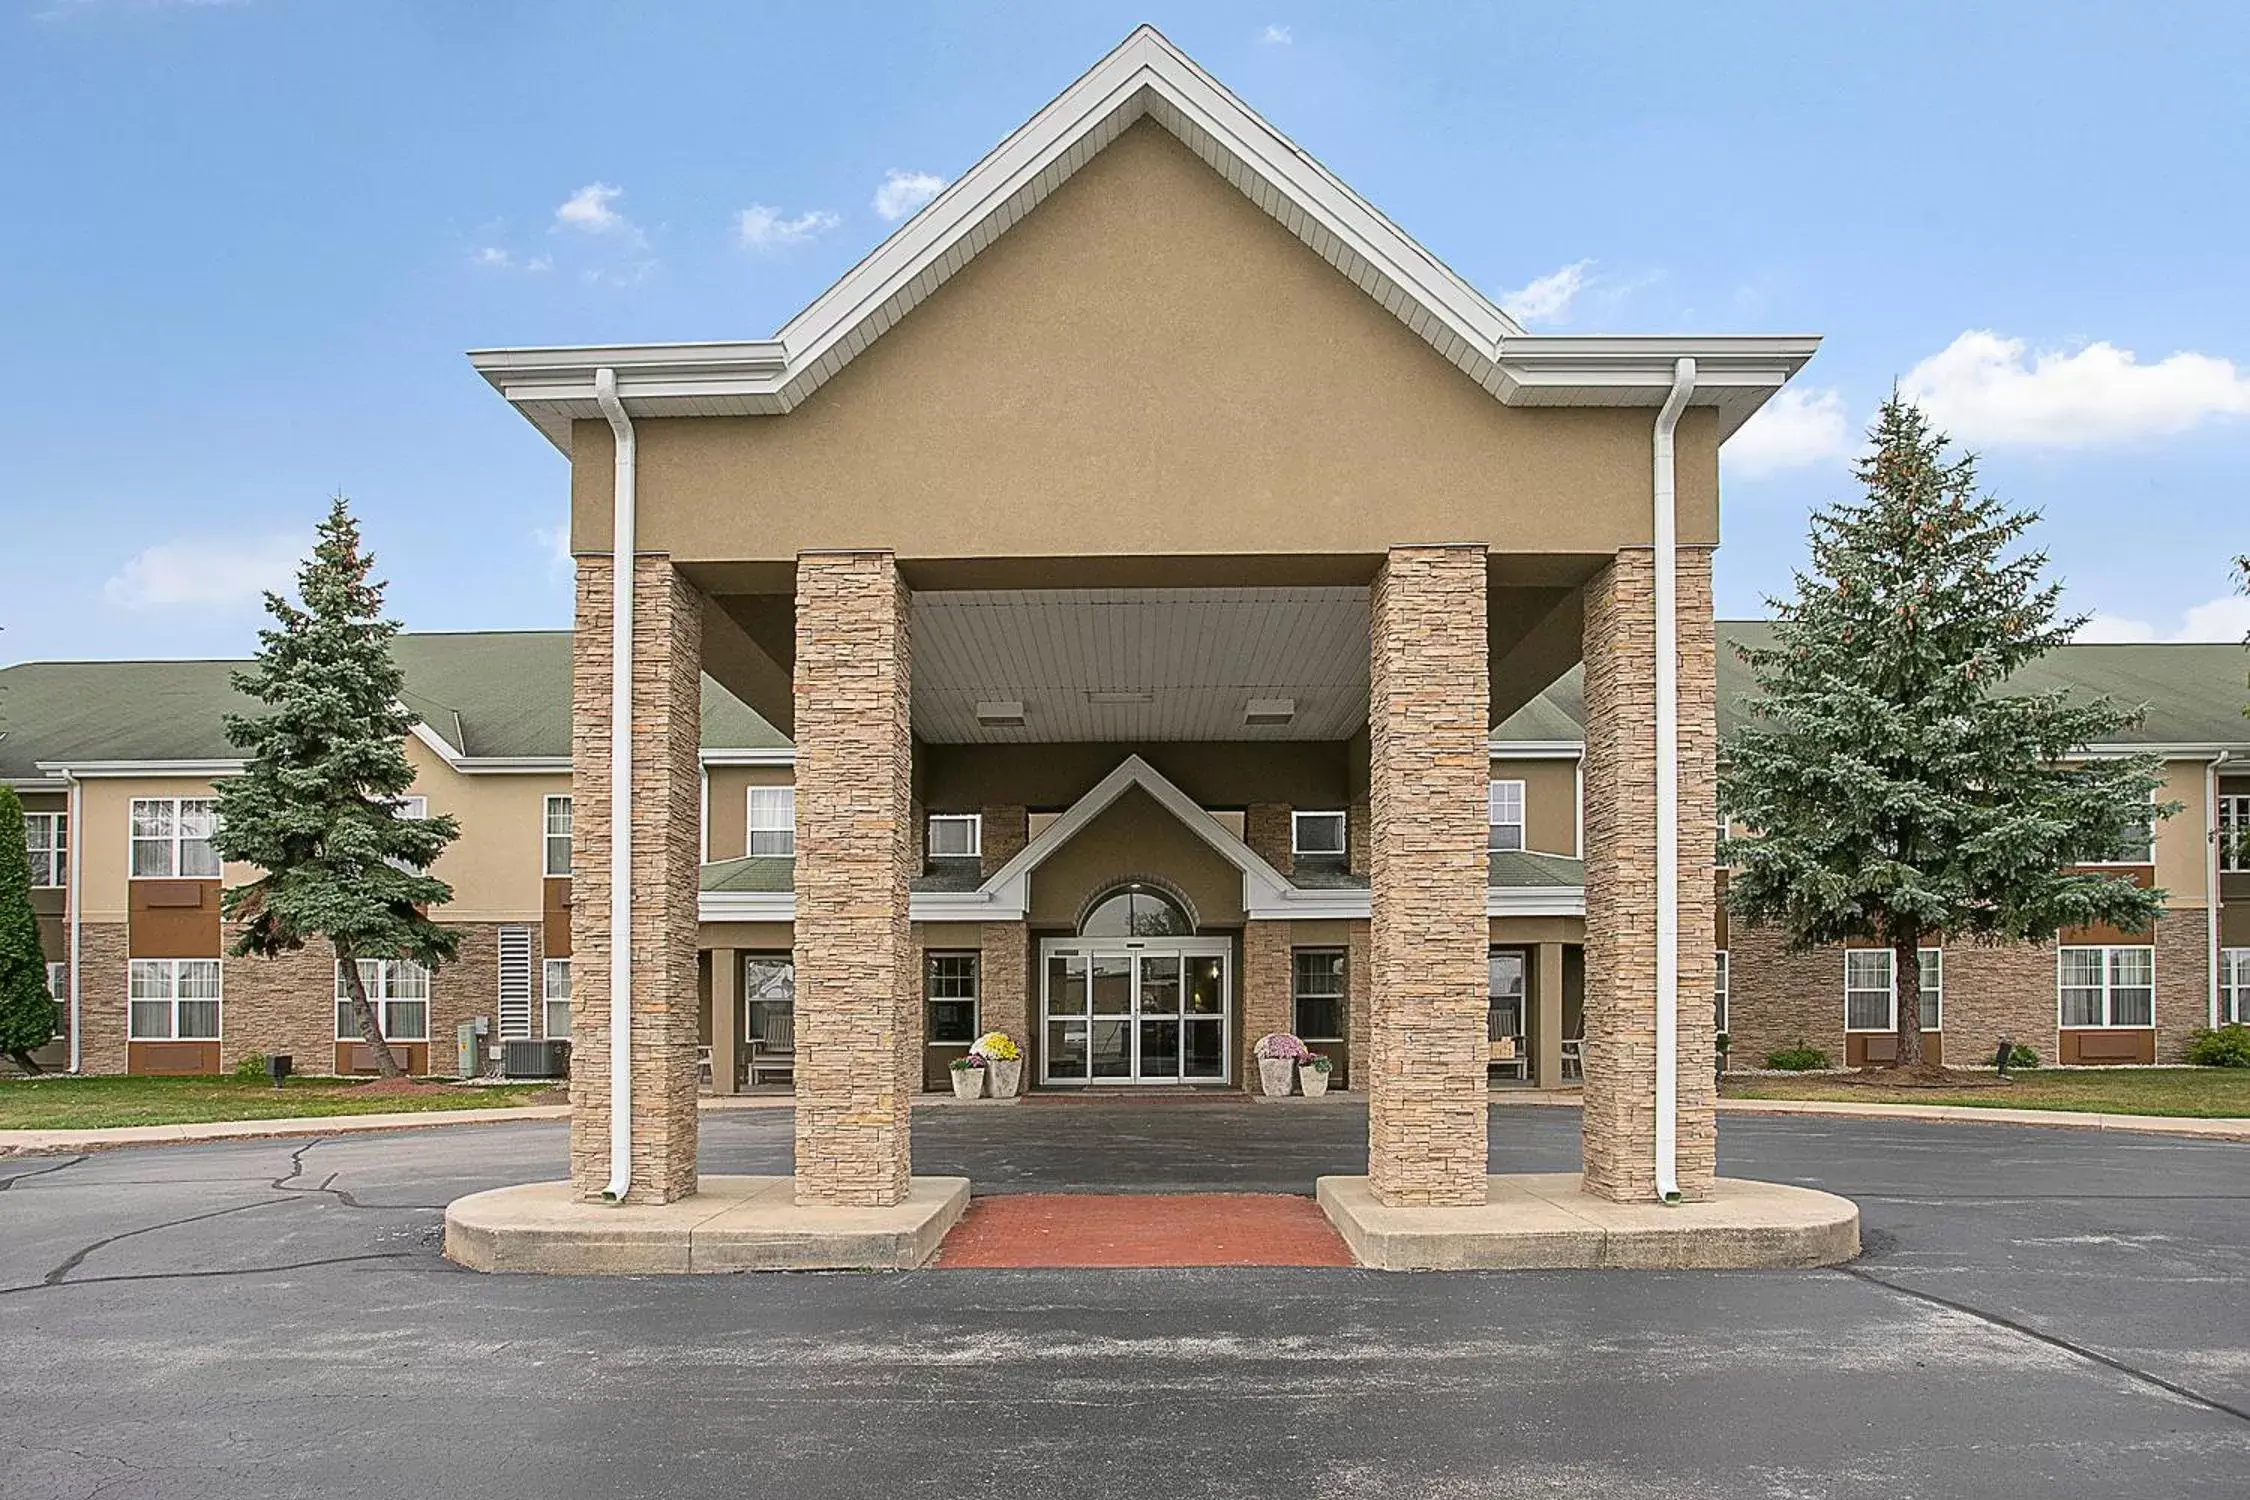 Property building in Country Inn & Suites by Radisson, Green Bay, WI